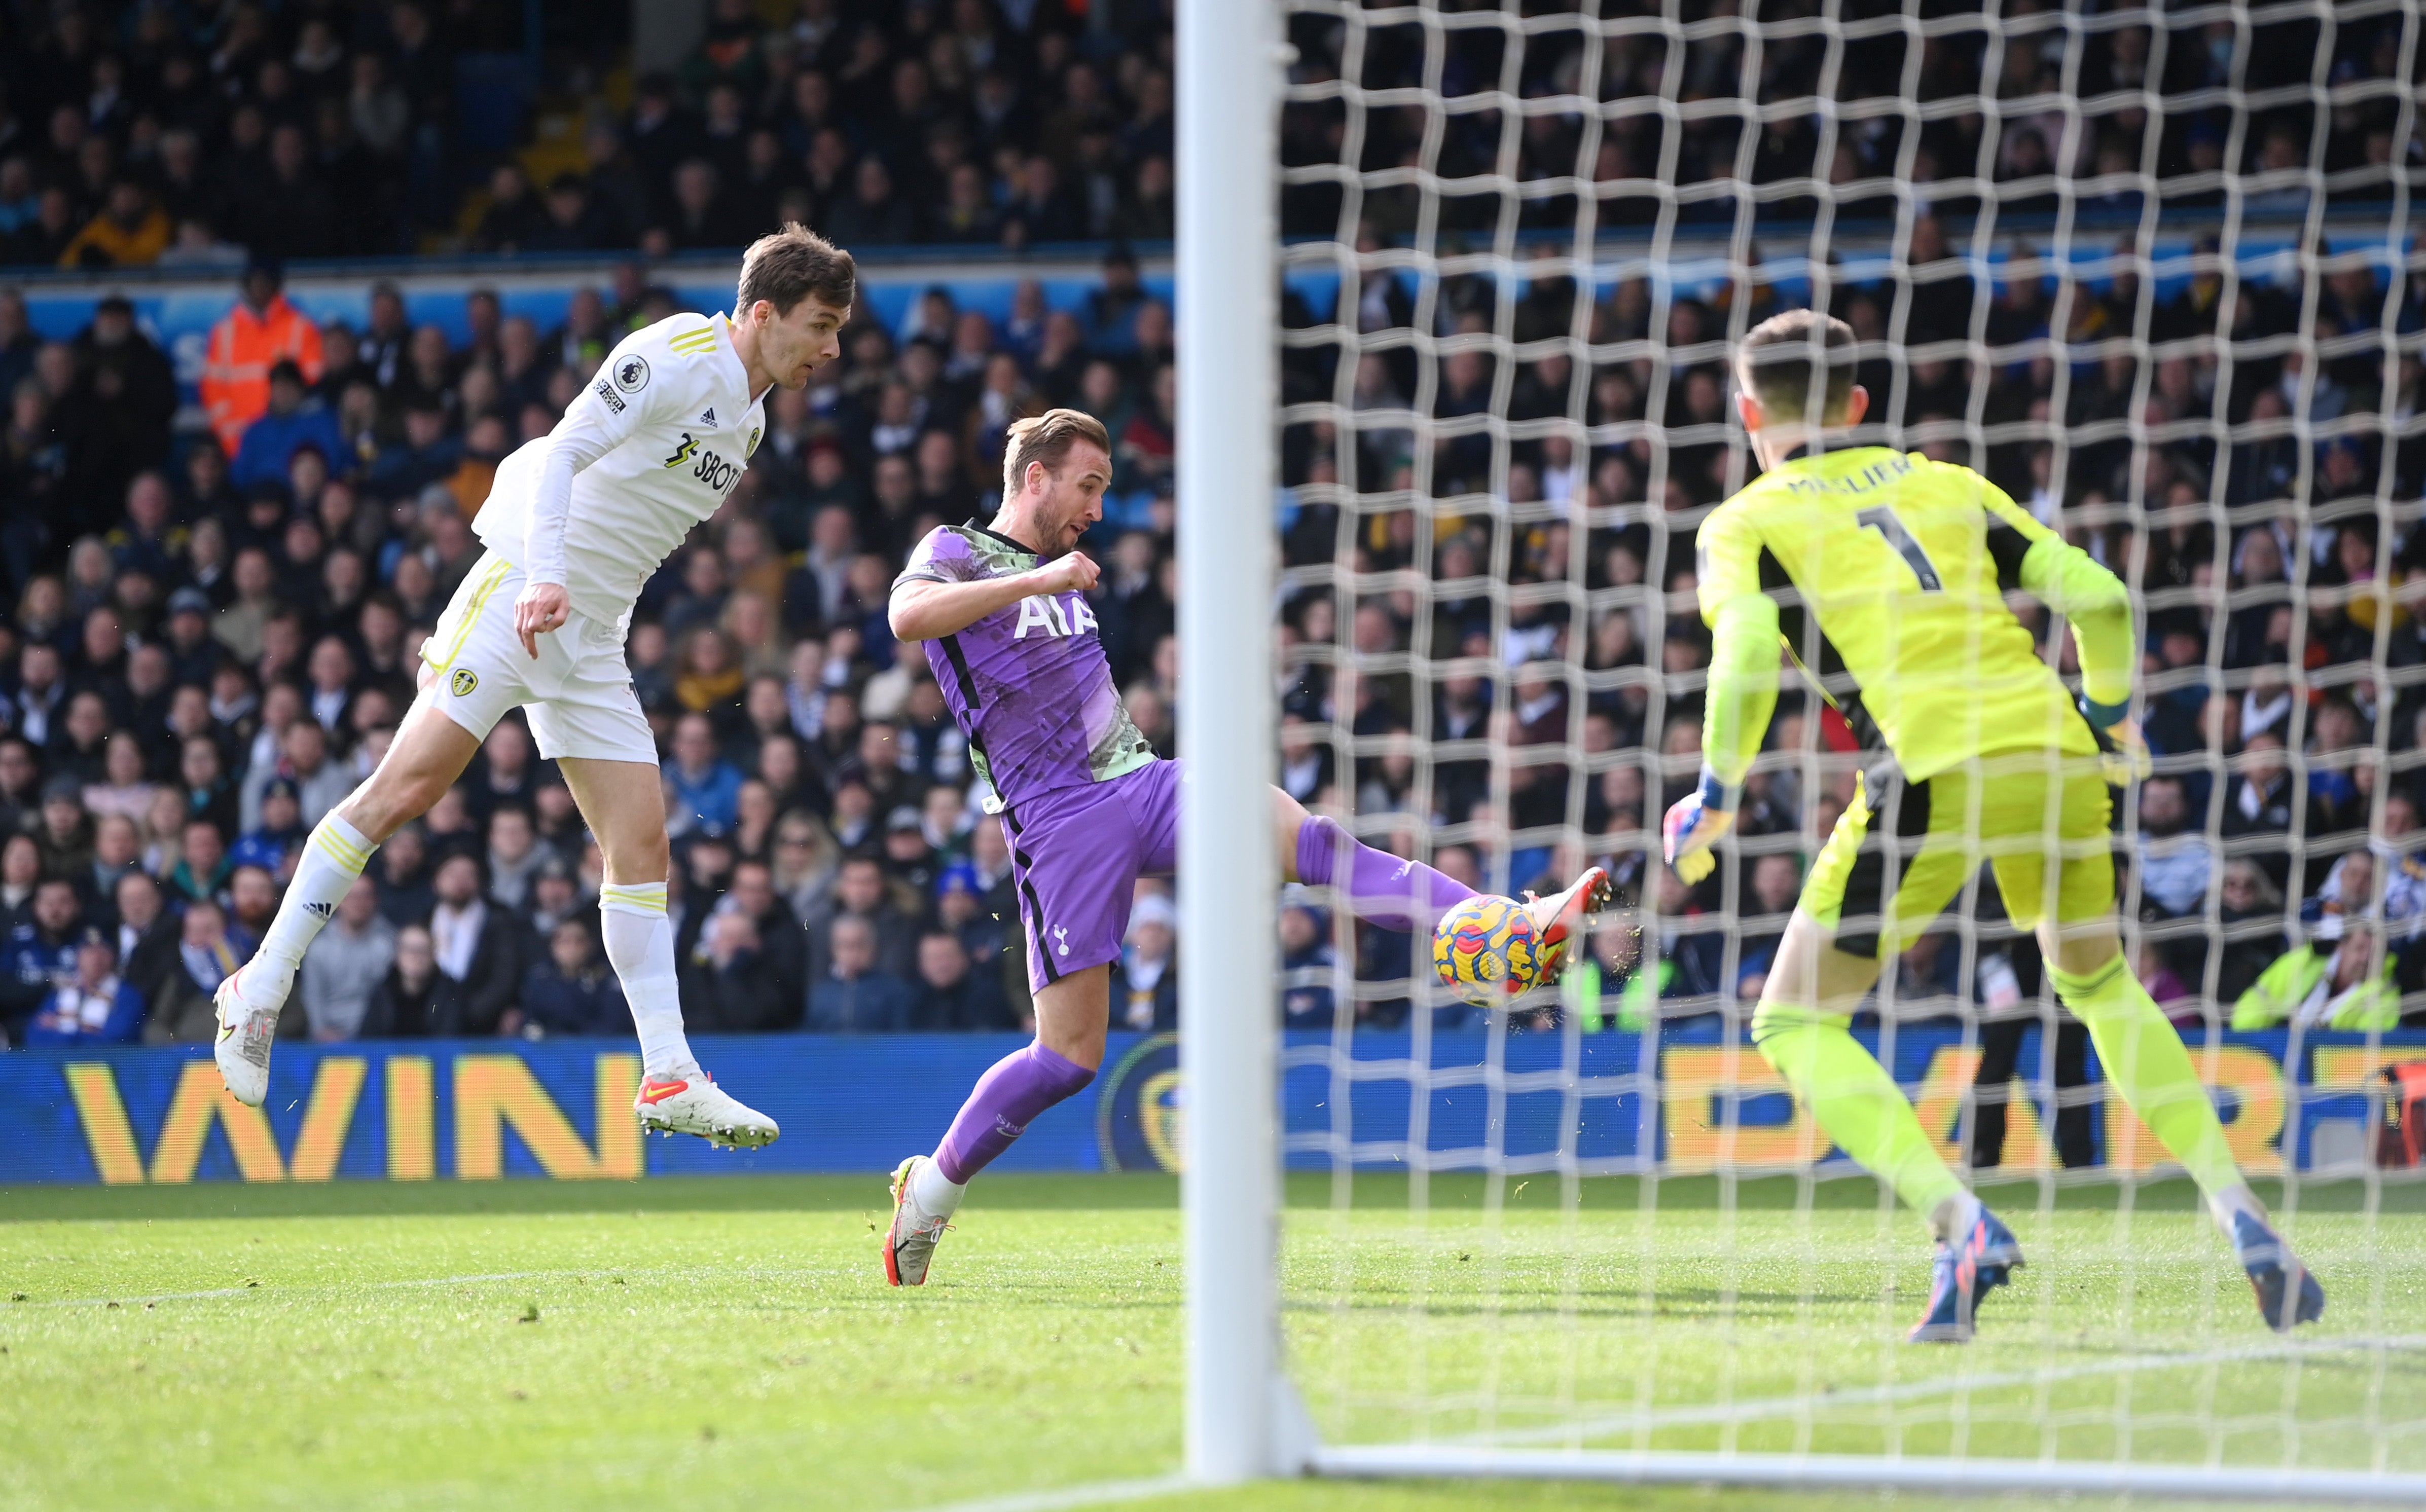 Harry Kane put in a brilliant all-round display as Spurs beat Leeds 4-0